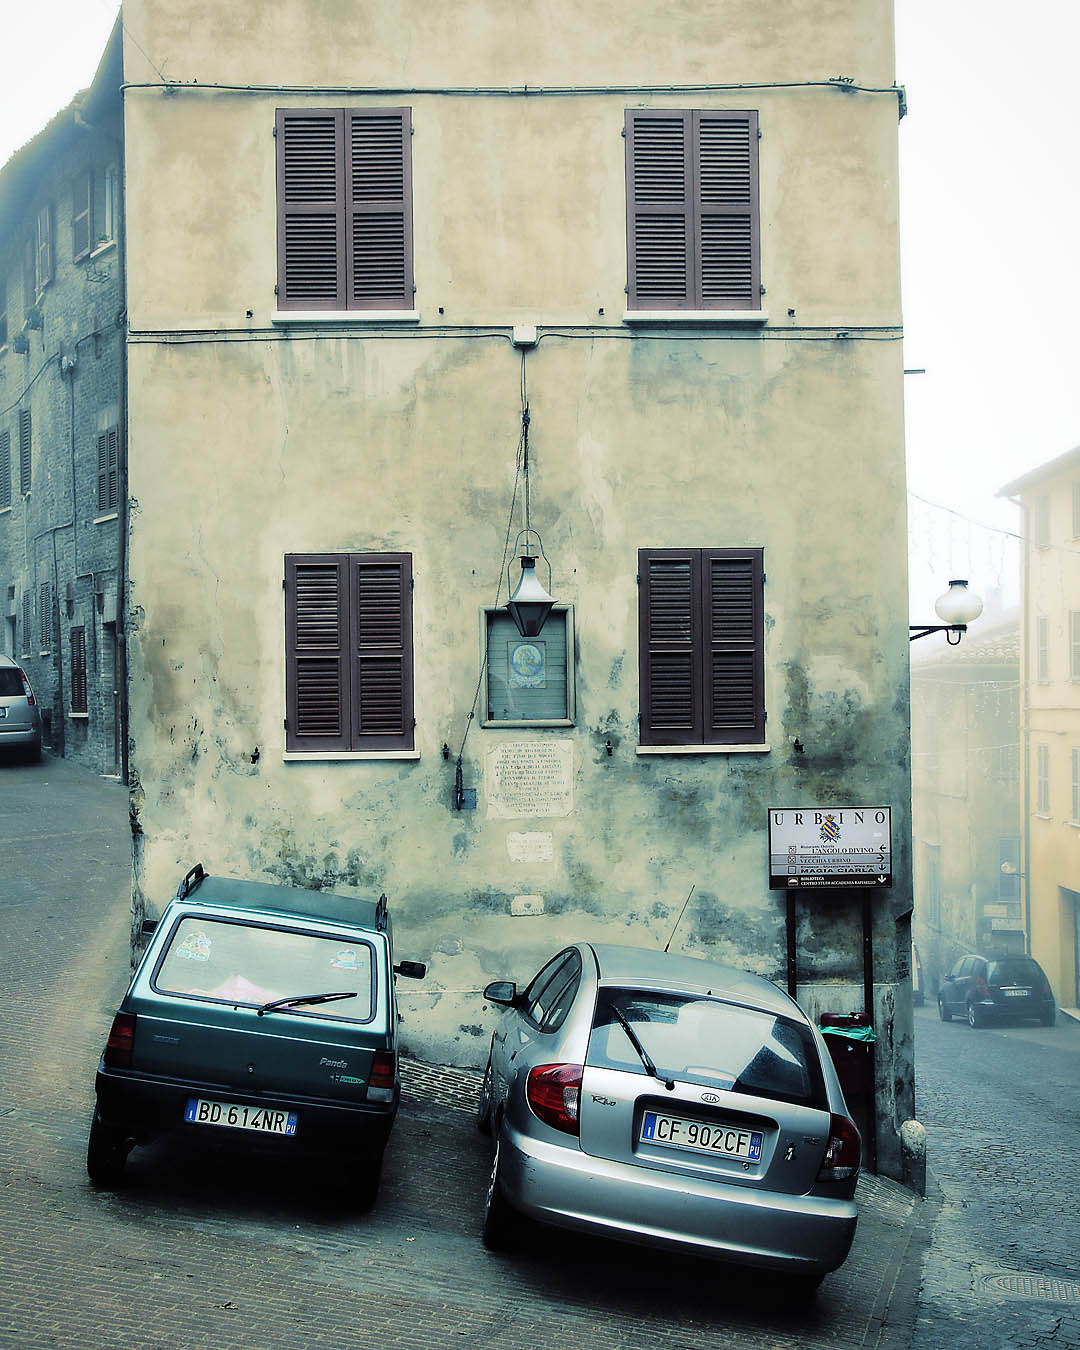 Parking for two, Urbino, Italy, 2008